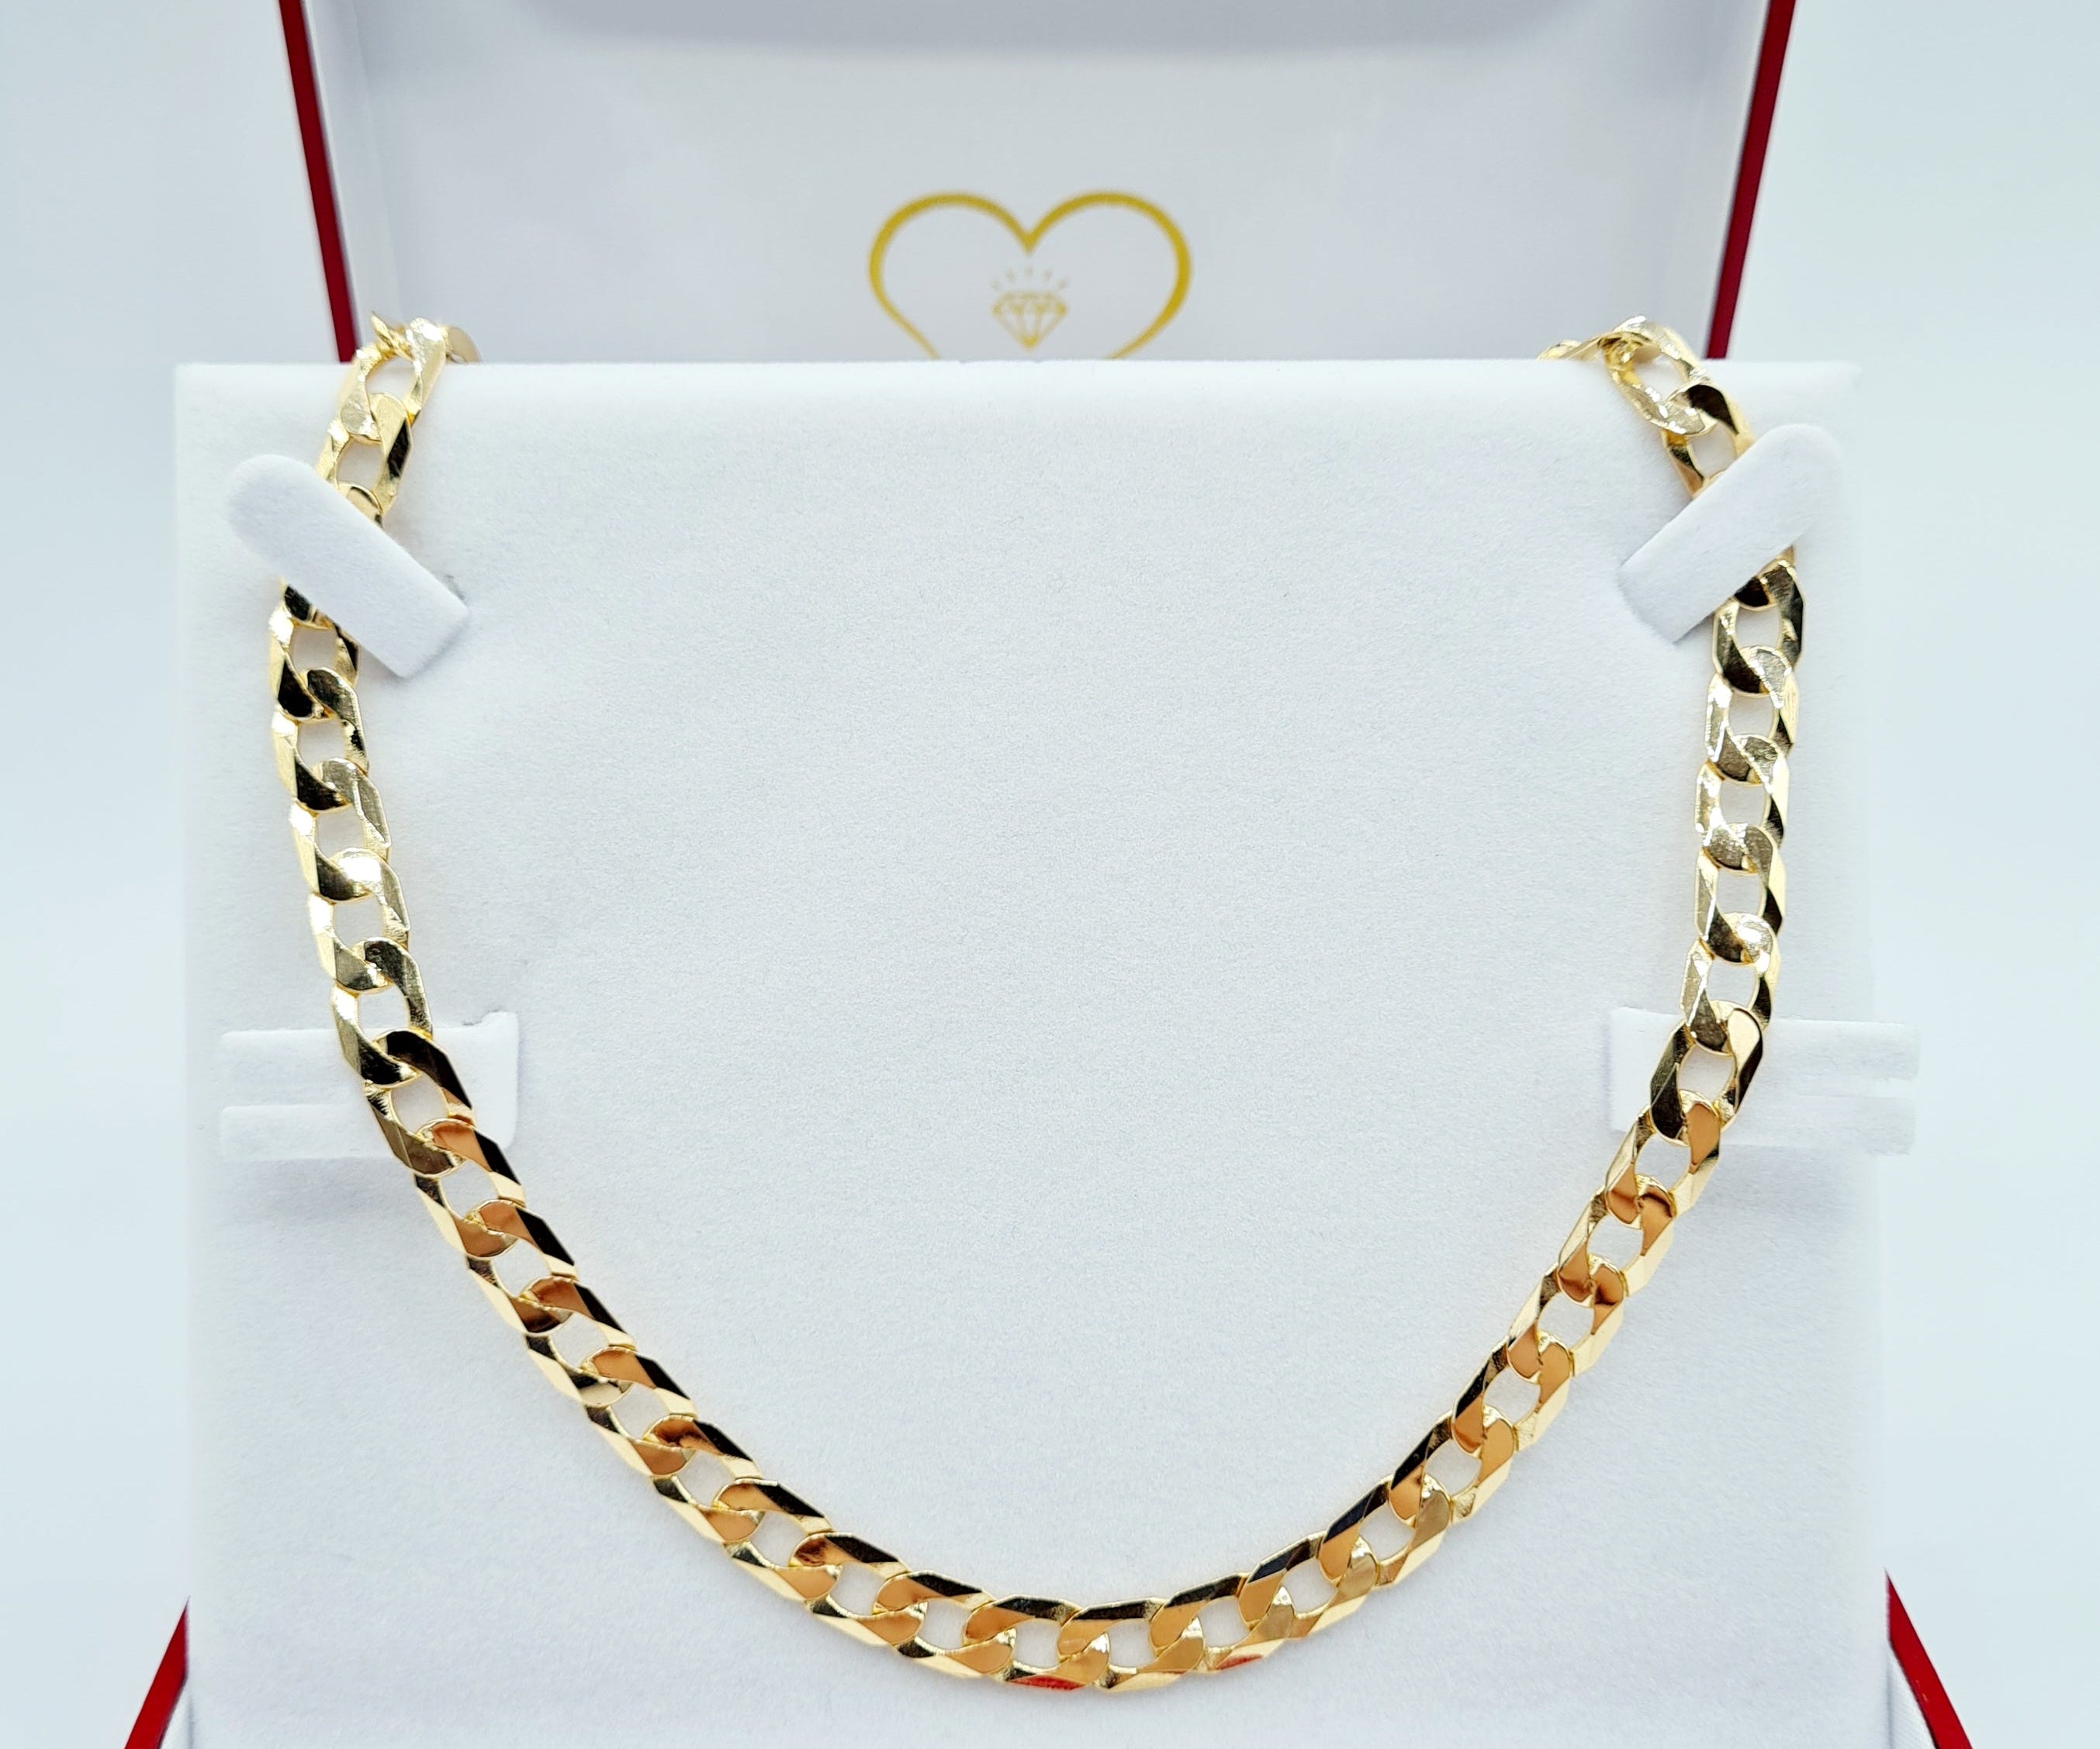 9ct Gold Curb Chain - Forever Jewellers Cork  Forever Jewellers Cork | Forever Jewellers, Maria Gleeson Jewellers, , Forever Jewellery,  Gold and Silver rings, tennis sets, bracelets, Ladies Ring Sets, Bridal Ring Sets. Engagement Rings | Cork. childrens. Kids Jewellery. womens jewellery. Cork Mens rolex style jewellery. cork. free. curb bracelet. jewellery cork city. College Ring. Womens. bangles. christening wedding bride to be Jewellers Cork . Engagement Ring, Wedding Jewellery Cork. 